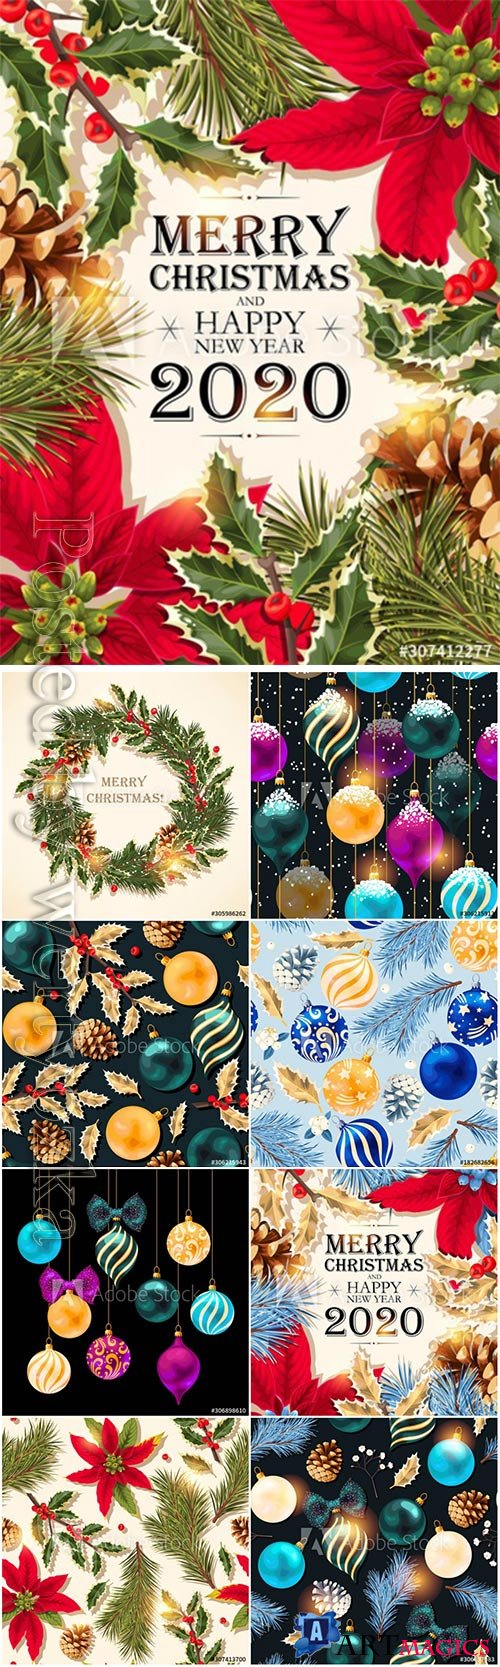 Christmas and New Year vector backgrounds with decorations